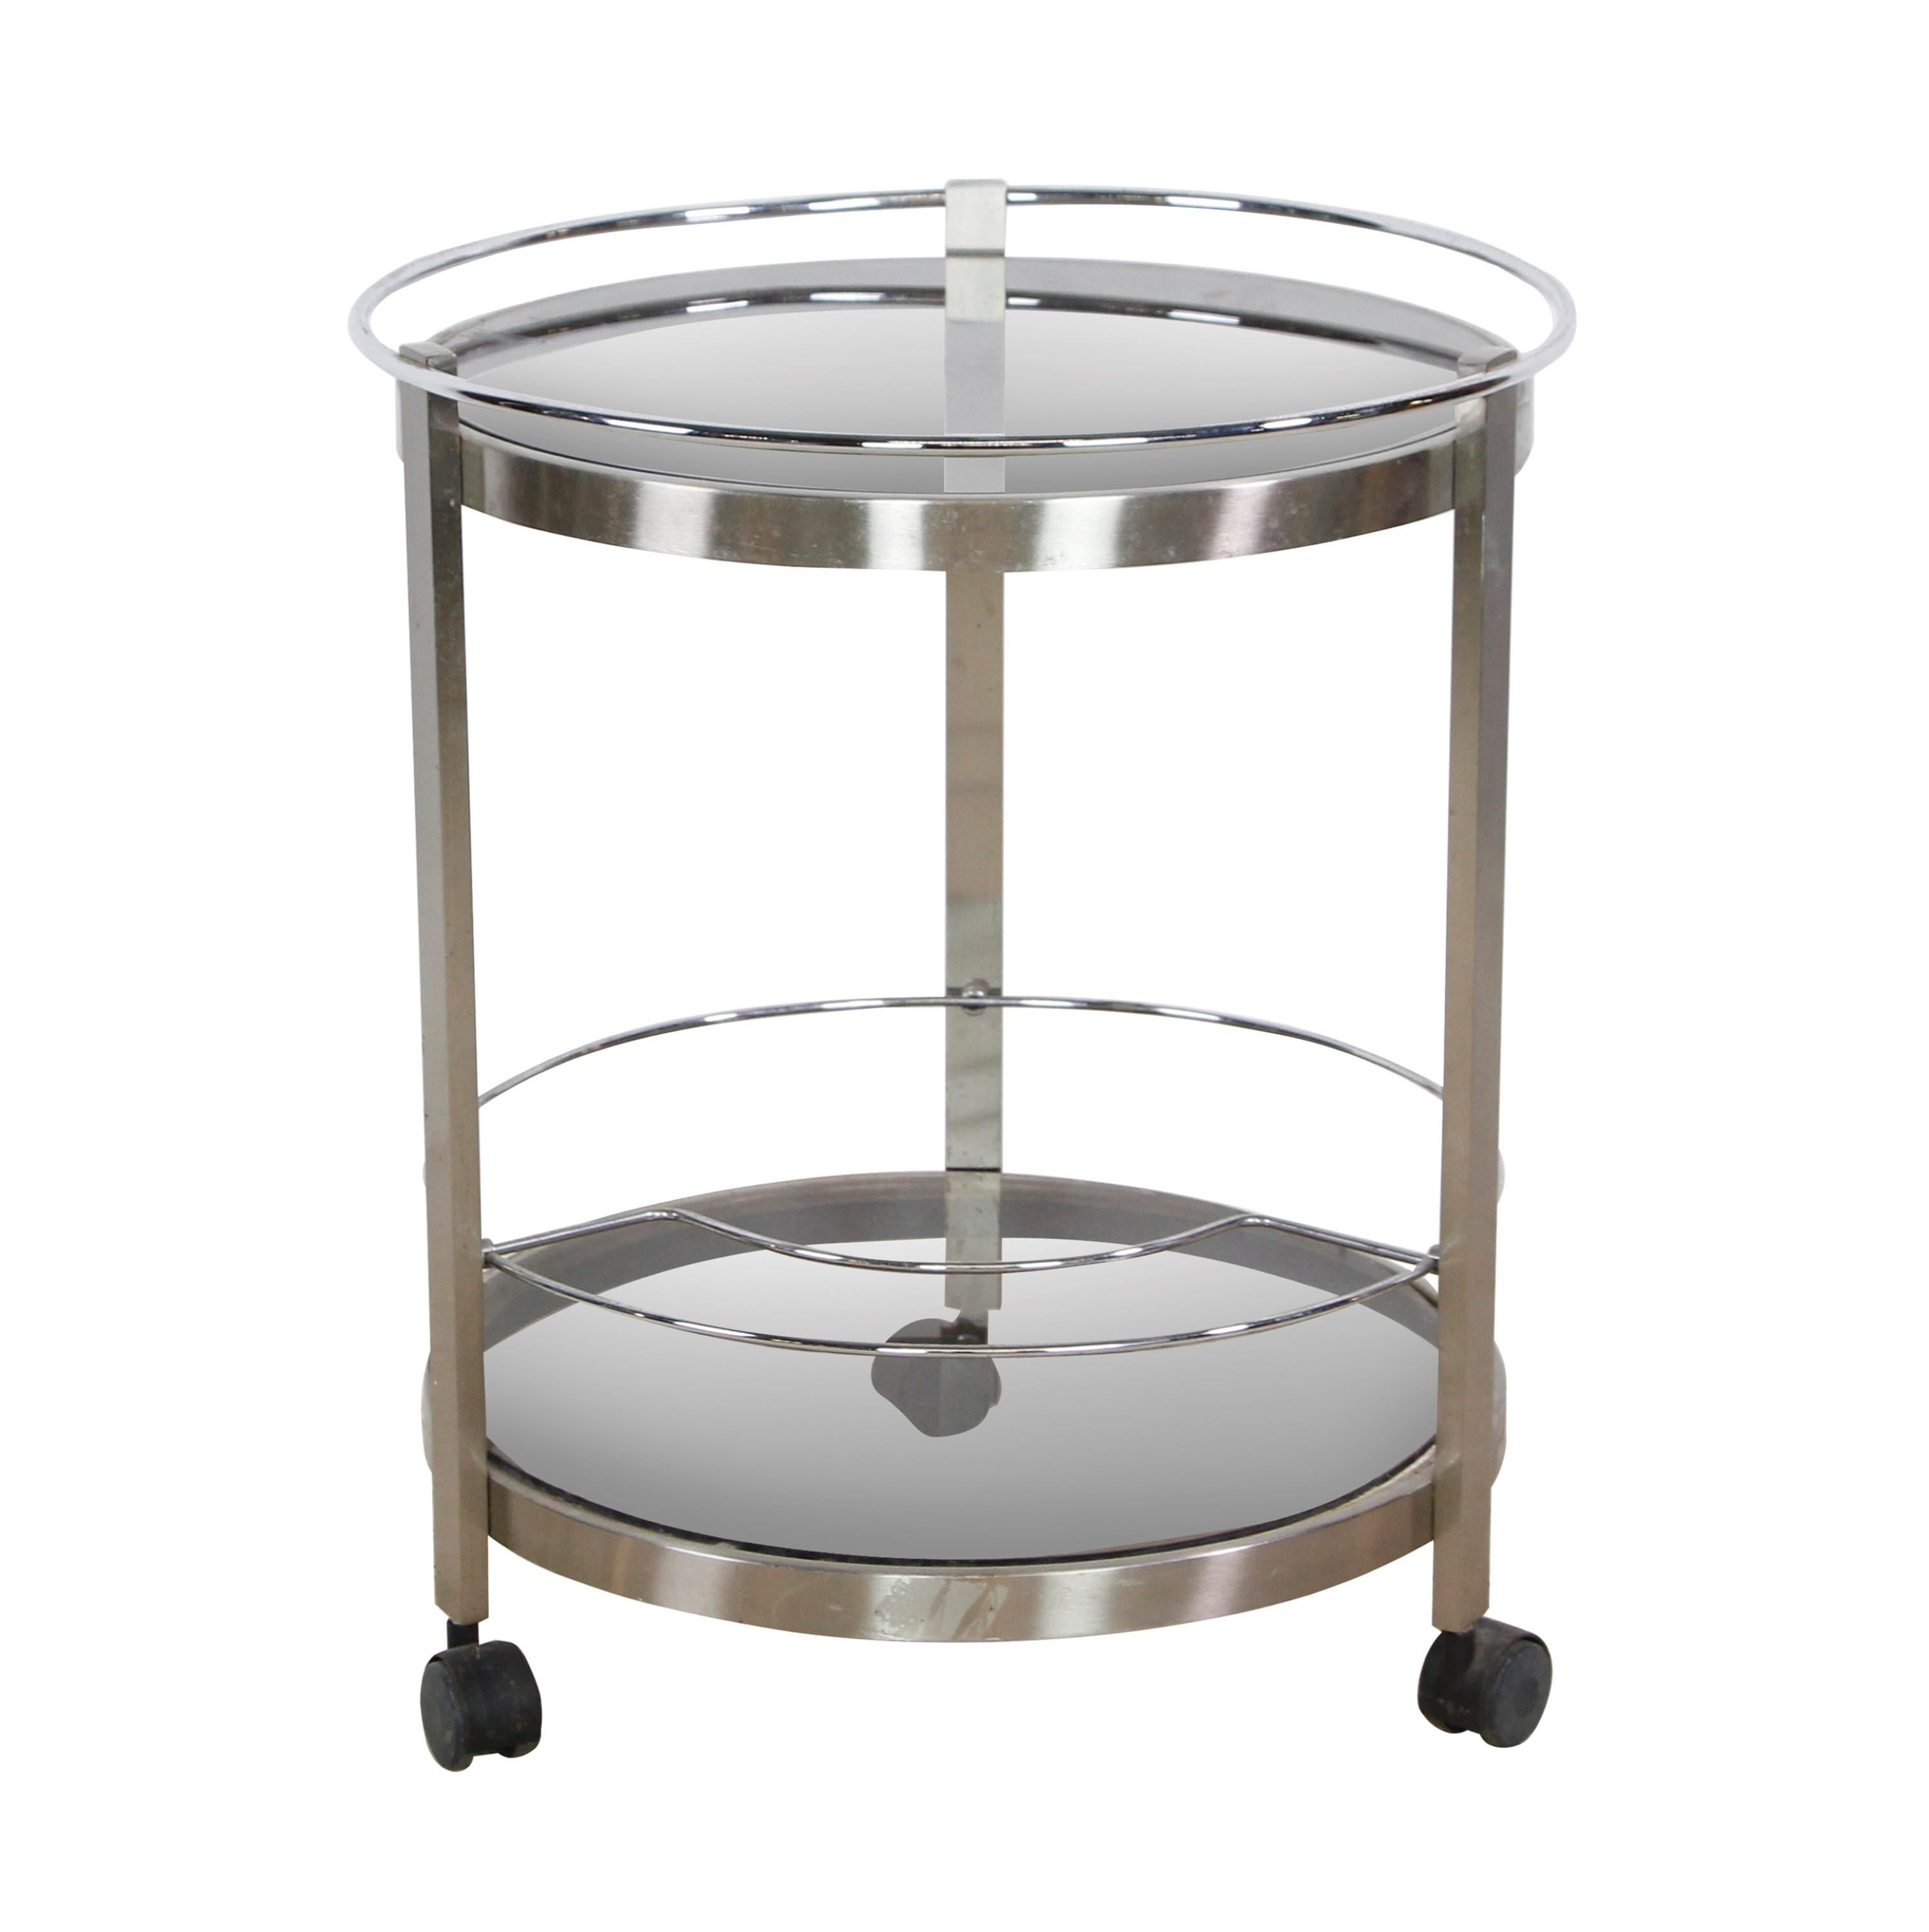 European Nickeled Steel Round Tinted Glass Bar Cart For Sale 1